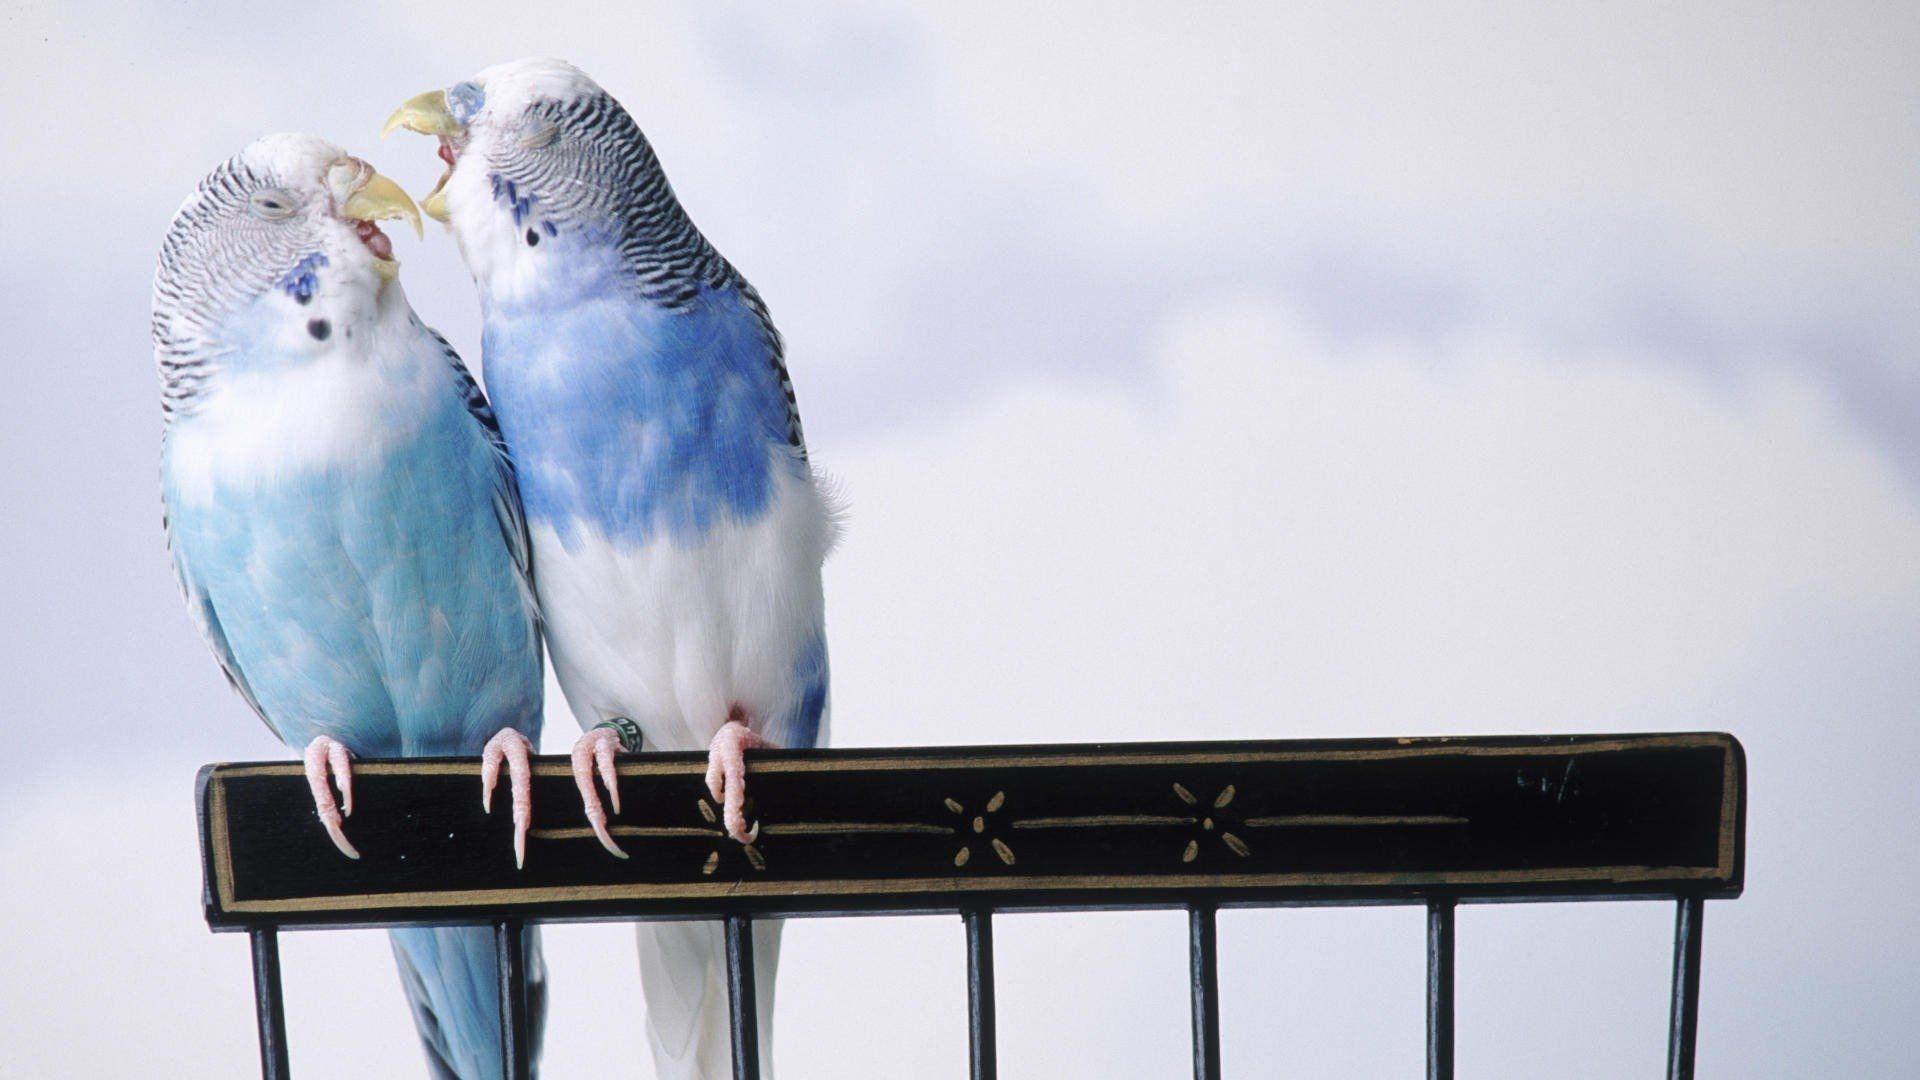 Budgerigar HD Wallpaper and Background Image